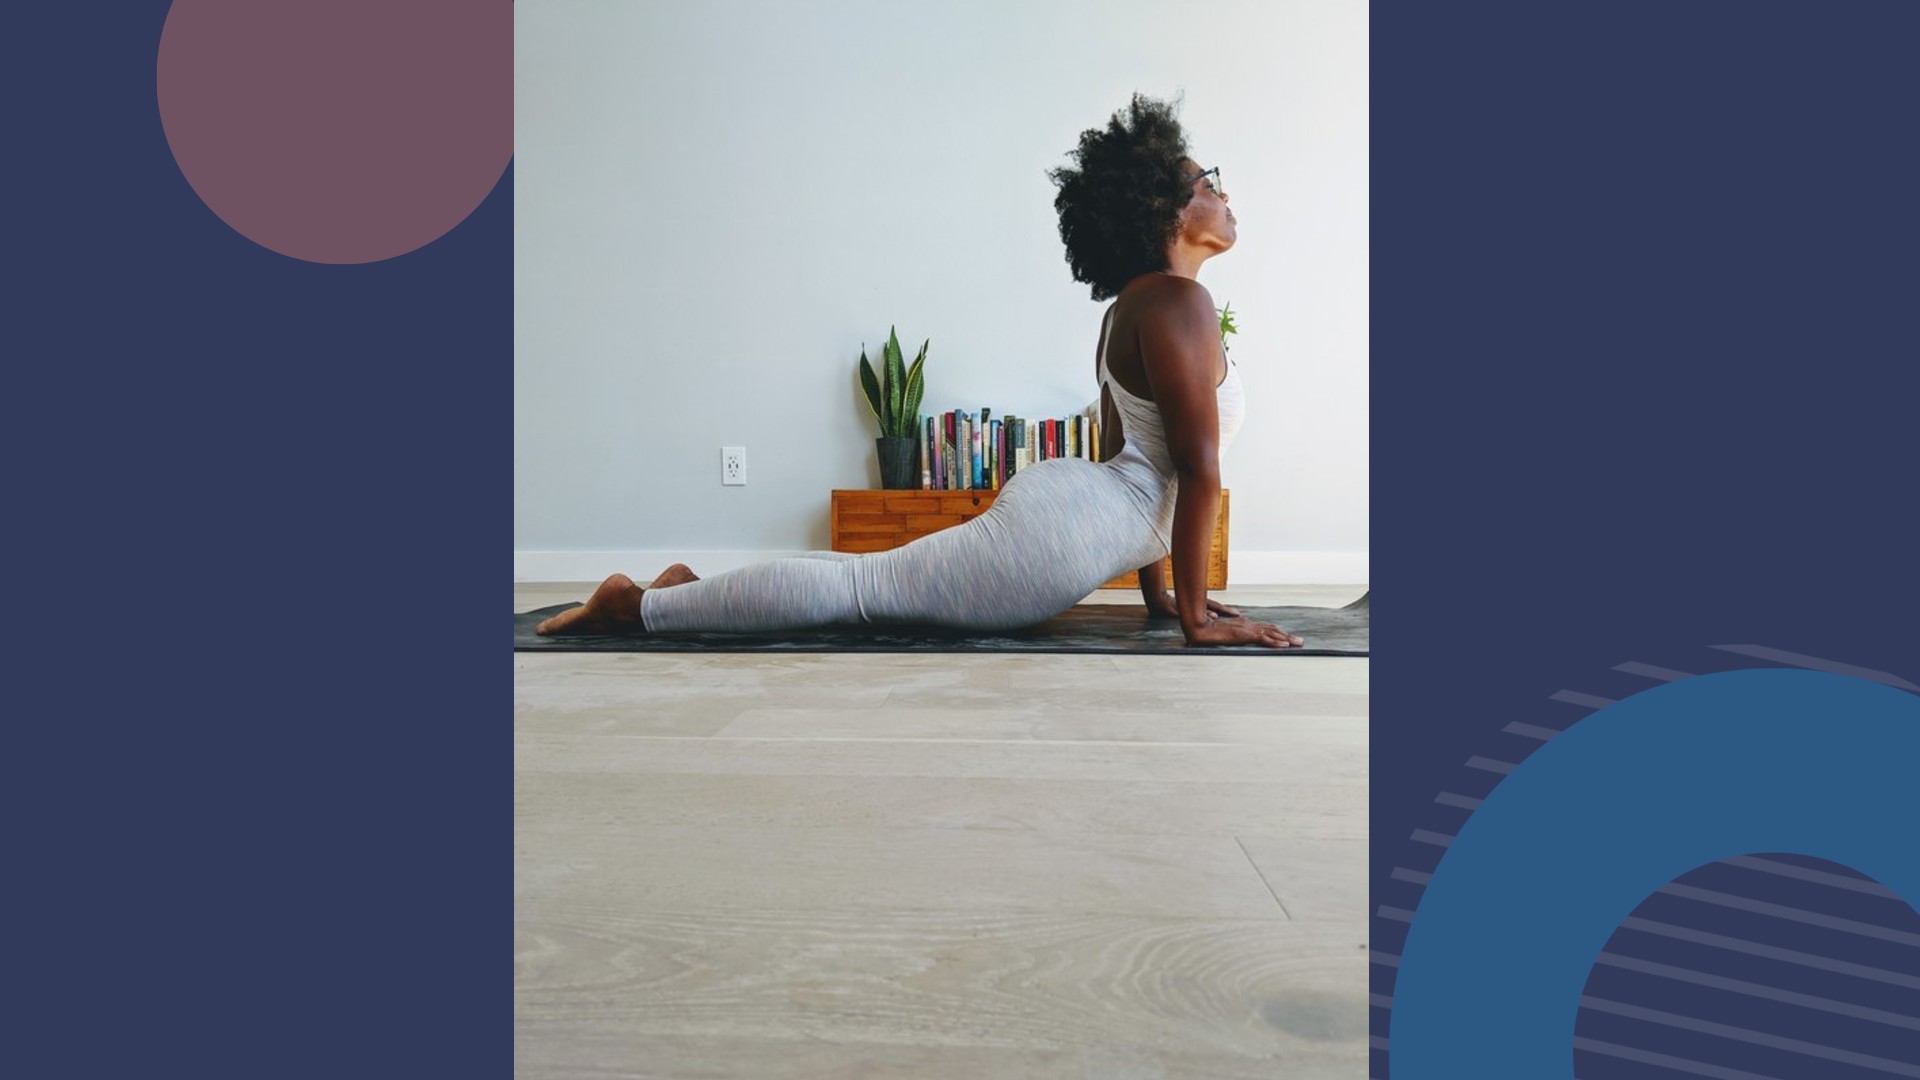 What are the benefits of practicing Ashtanga yoga?, by Nayra